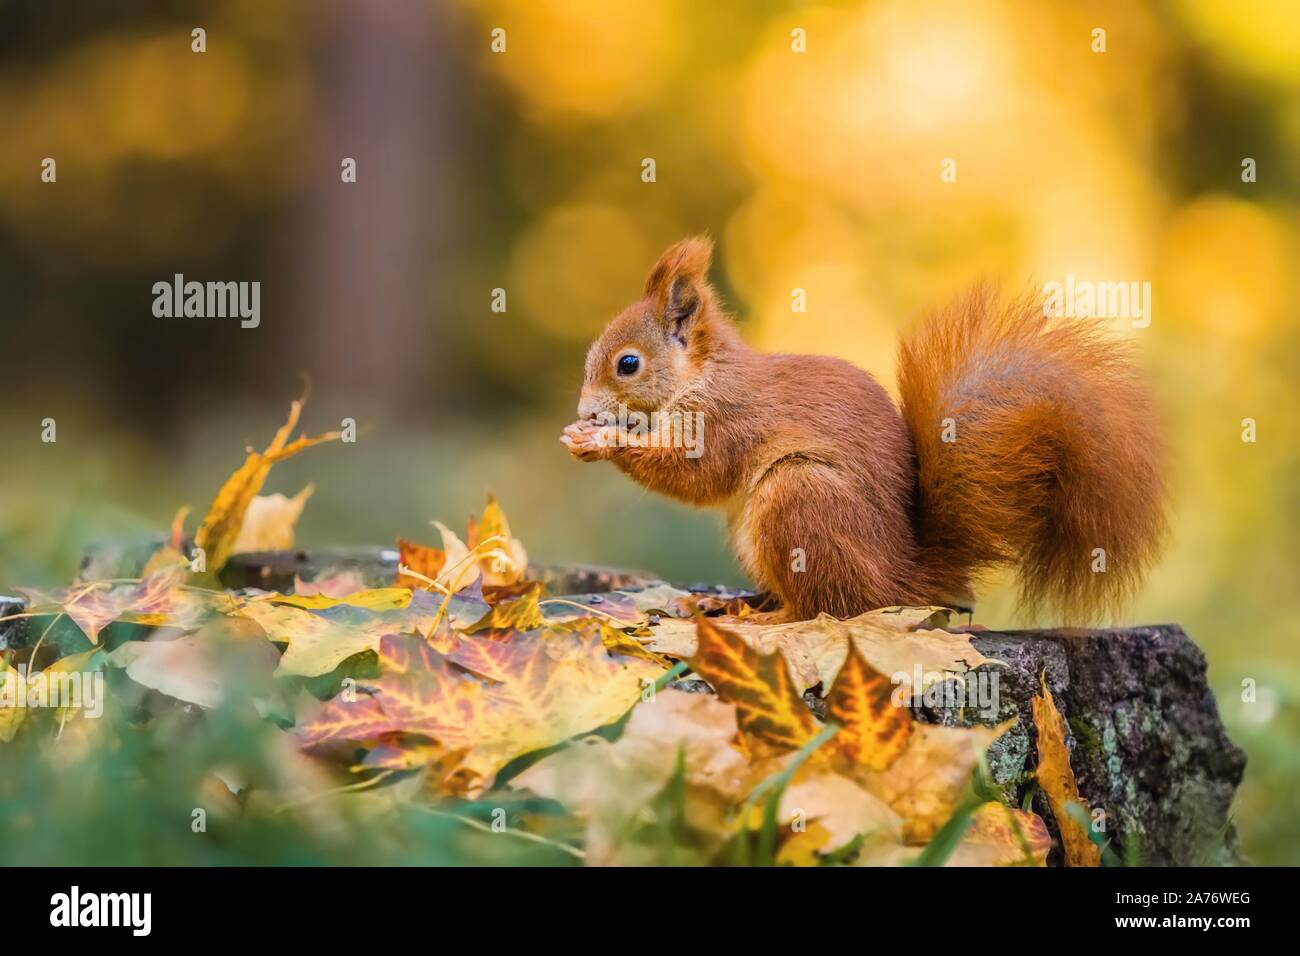 Cute red squirrel with fluffy tail sitting on a tree stump covered with colorful leaves feeding on seeds. Sunny autumn day in a deep forest. Blurry ye Stock Photo